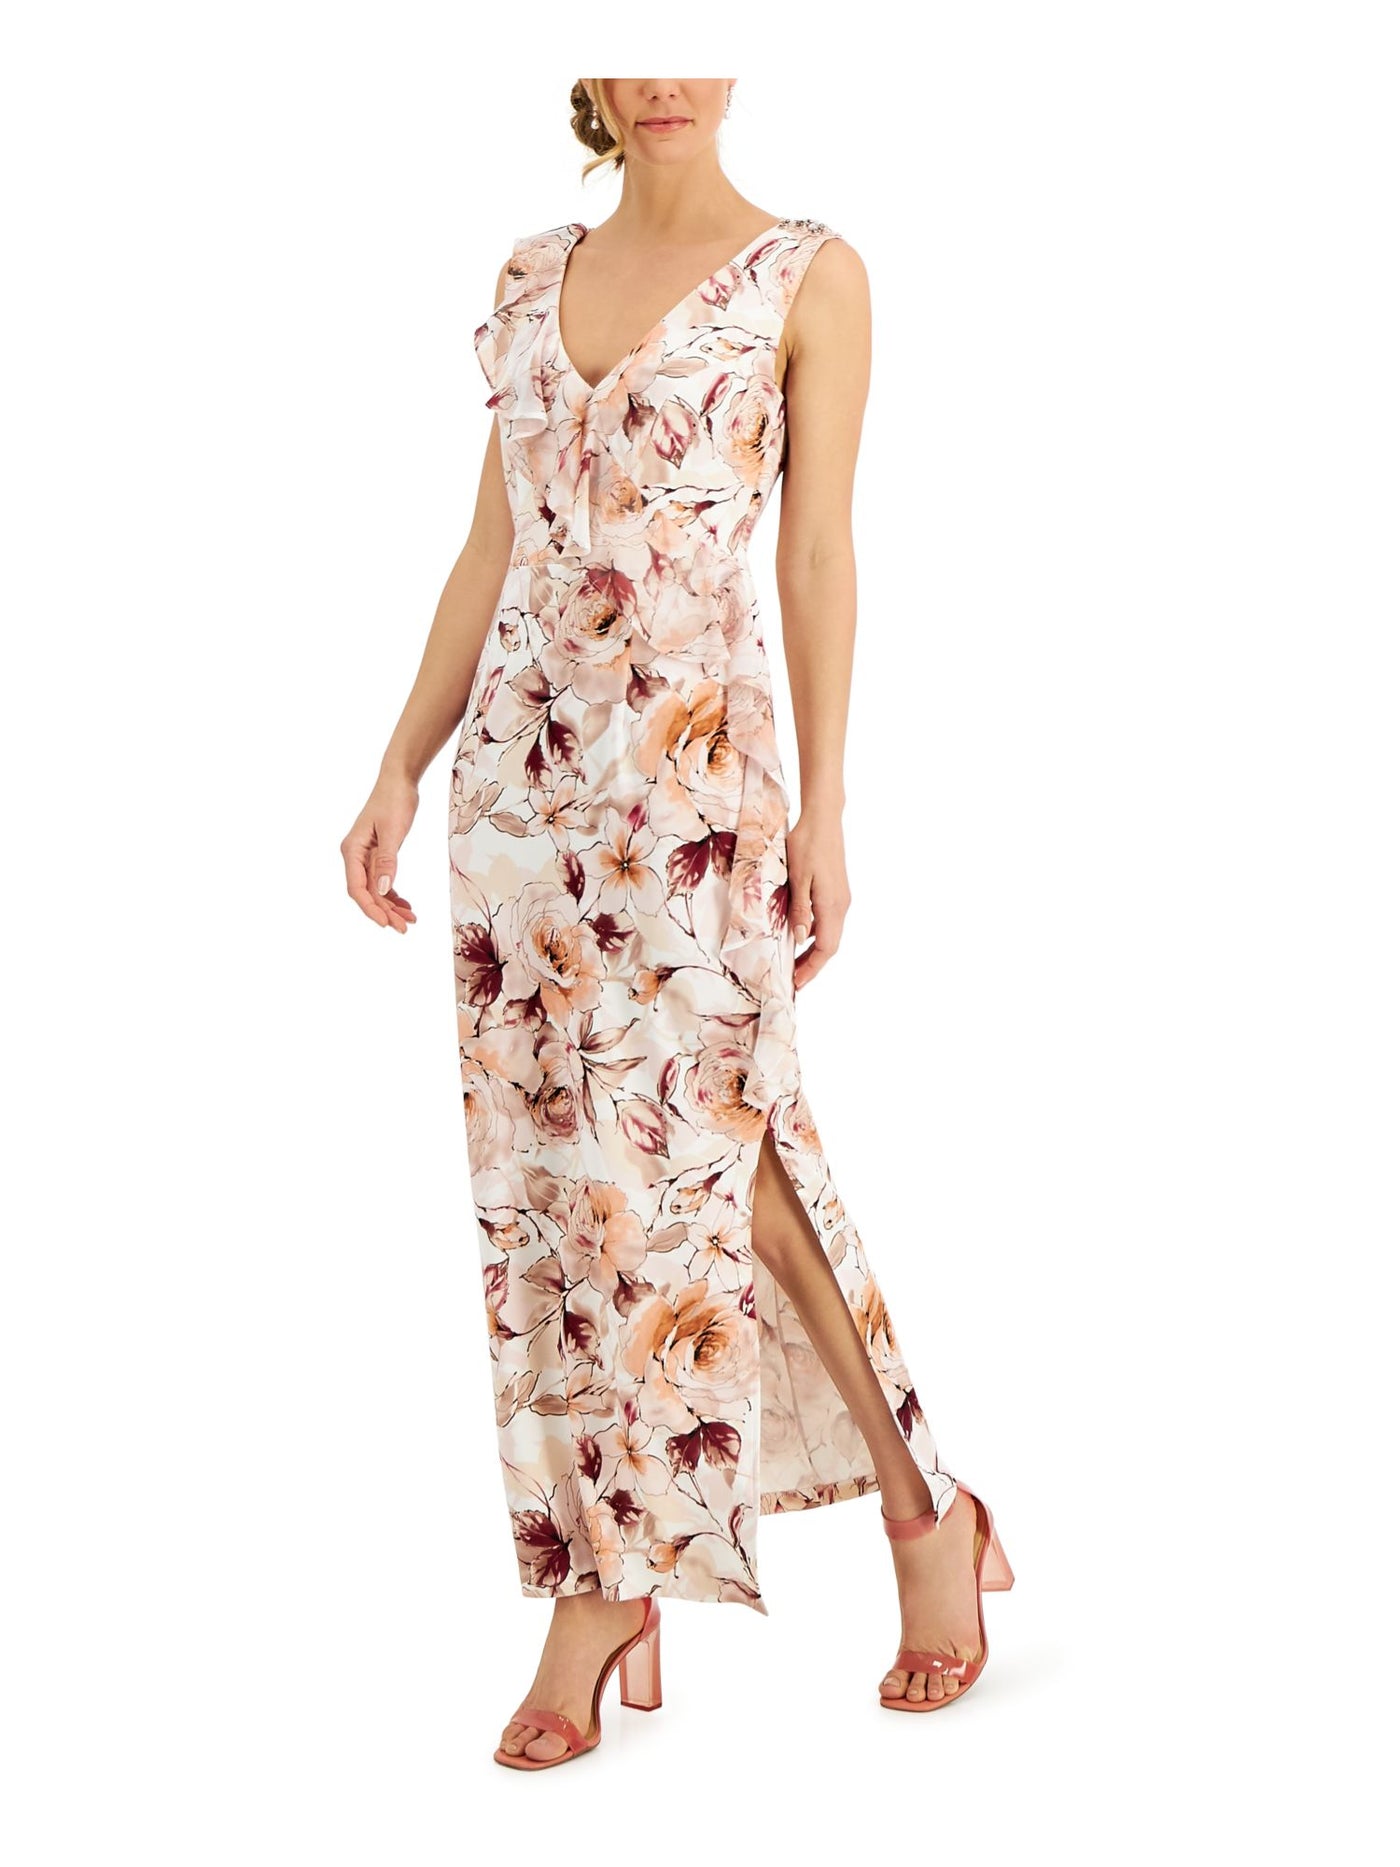 CONNECTED APPAREL Womens Beige Stretch Zippered Ruffled Slit Scuba Floral Sleeveless V Neck Maxi Cocktail Sheath Dress 8